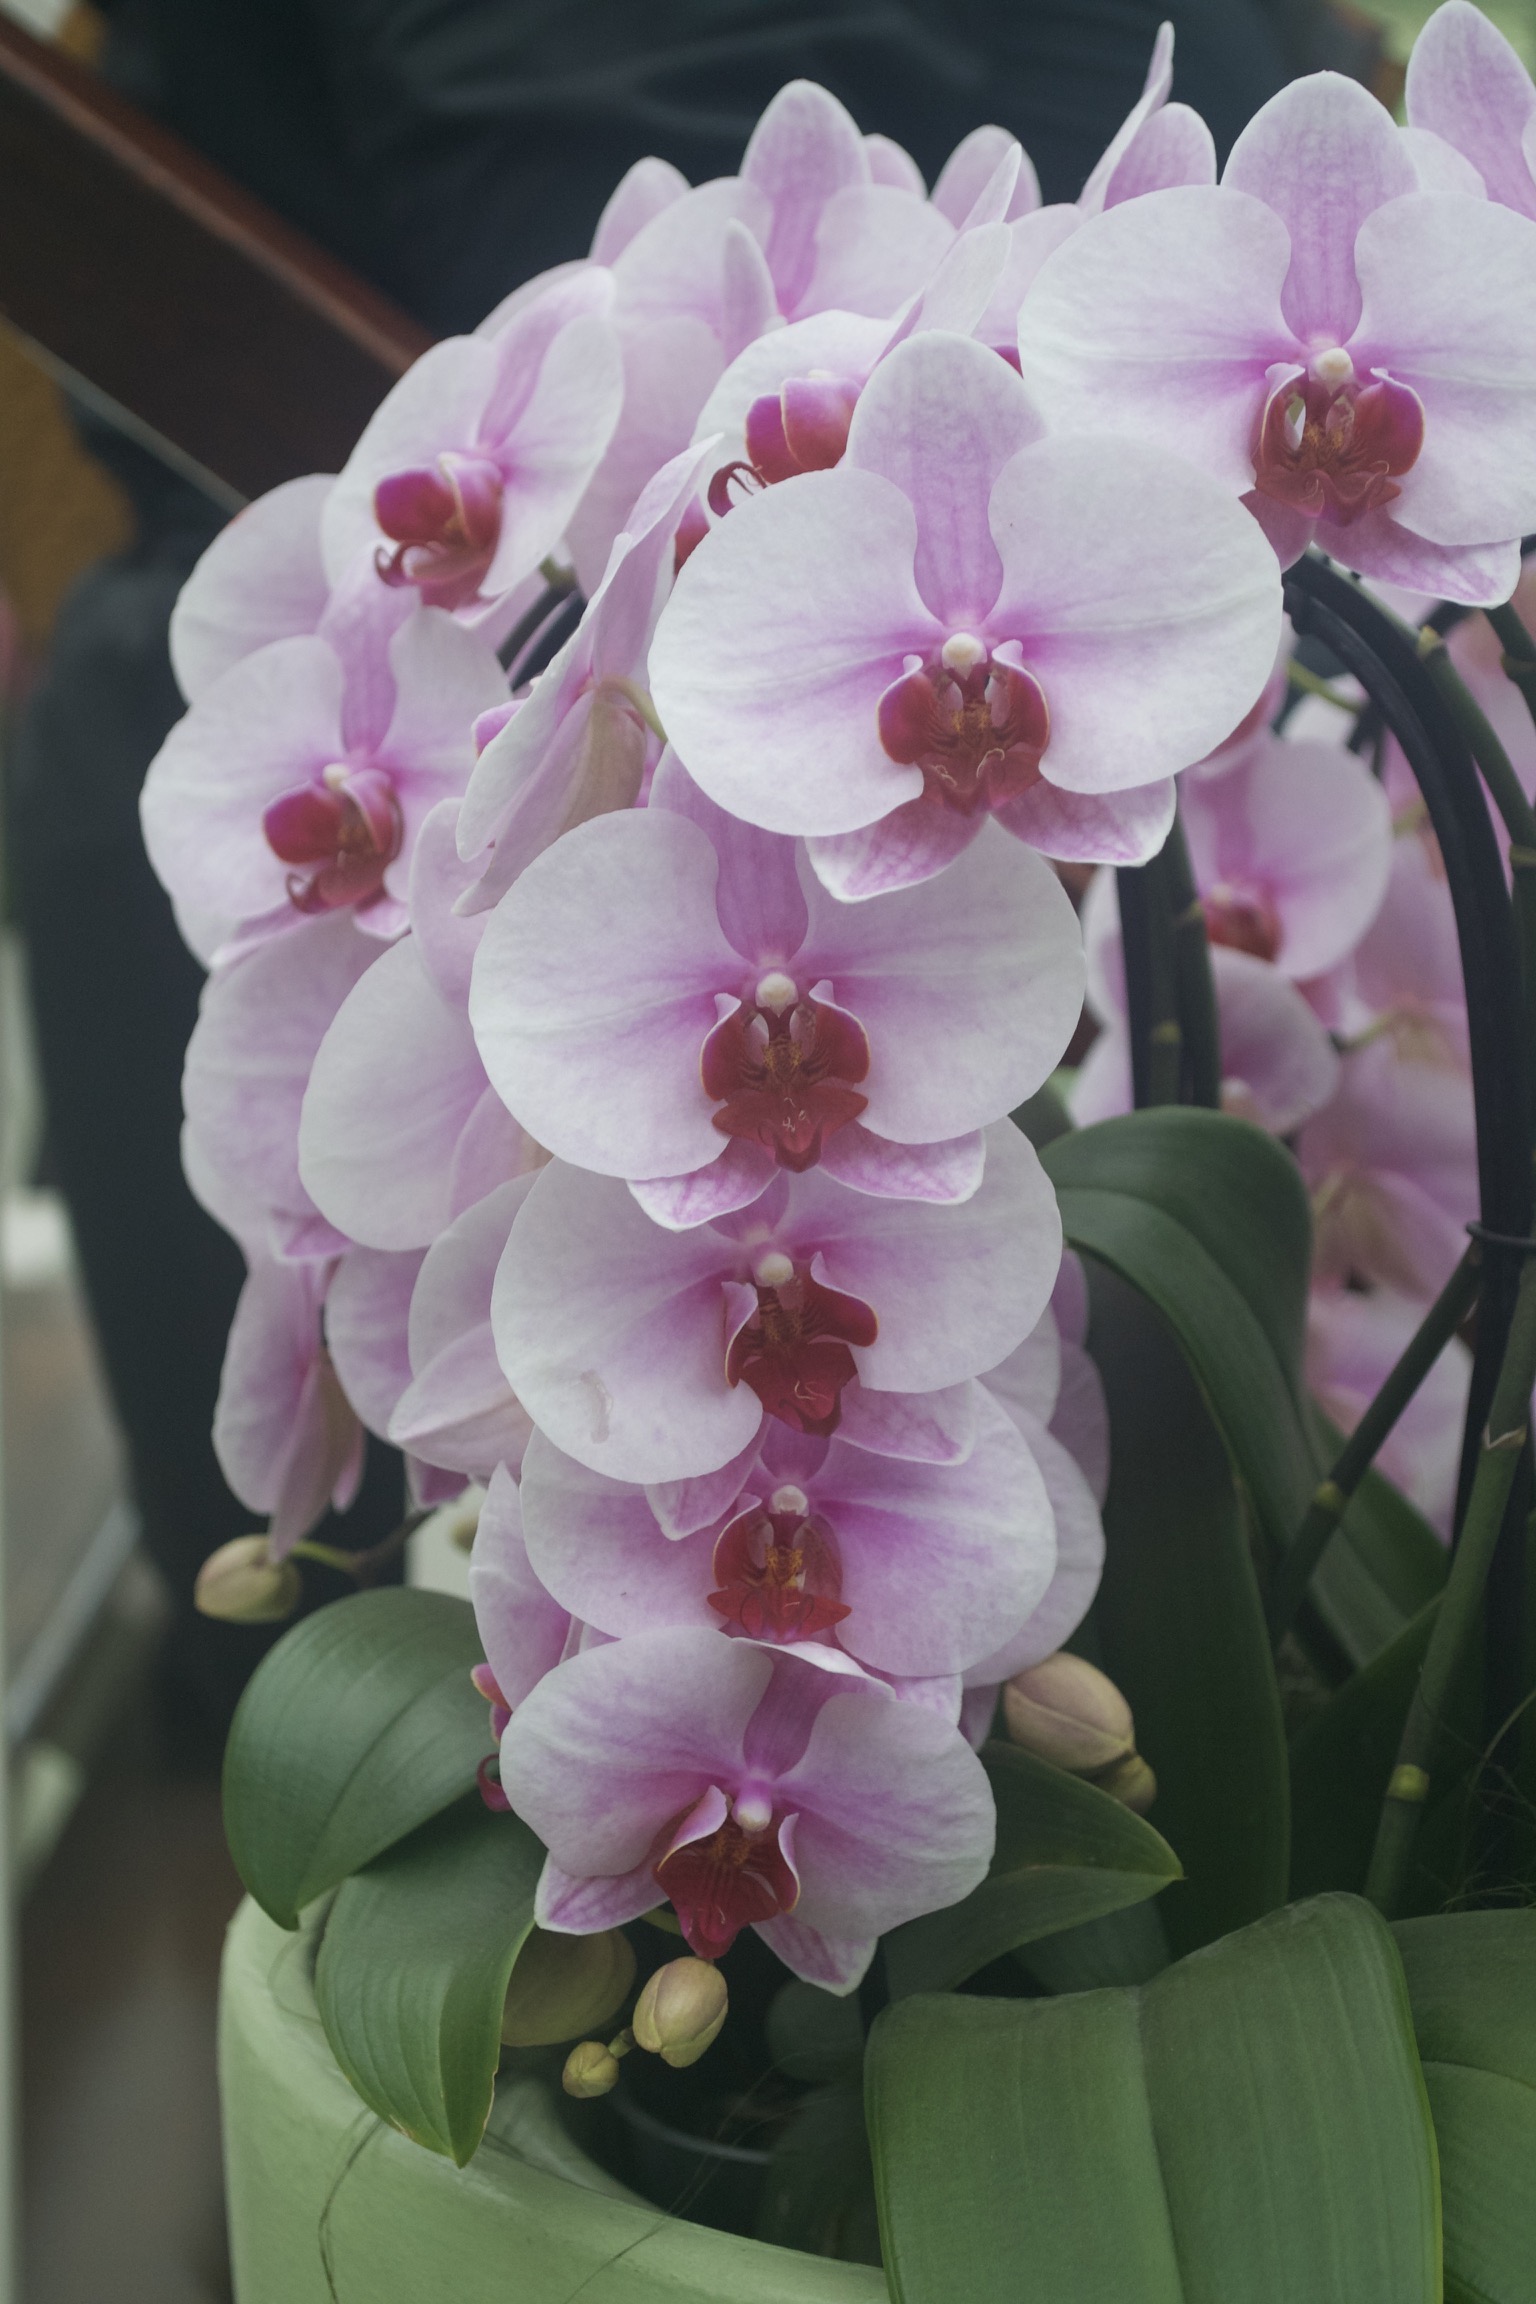 An orchid with pink petals and deeper centers.